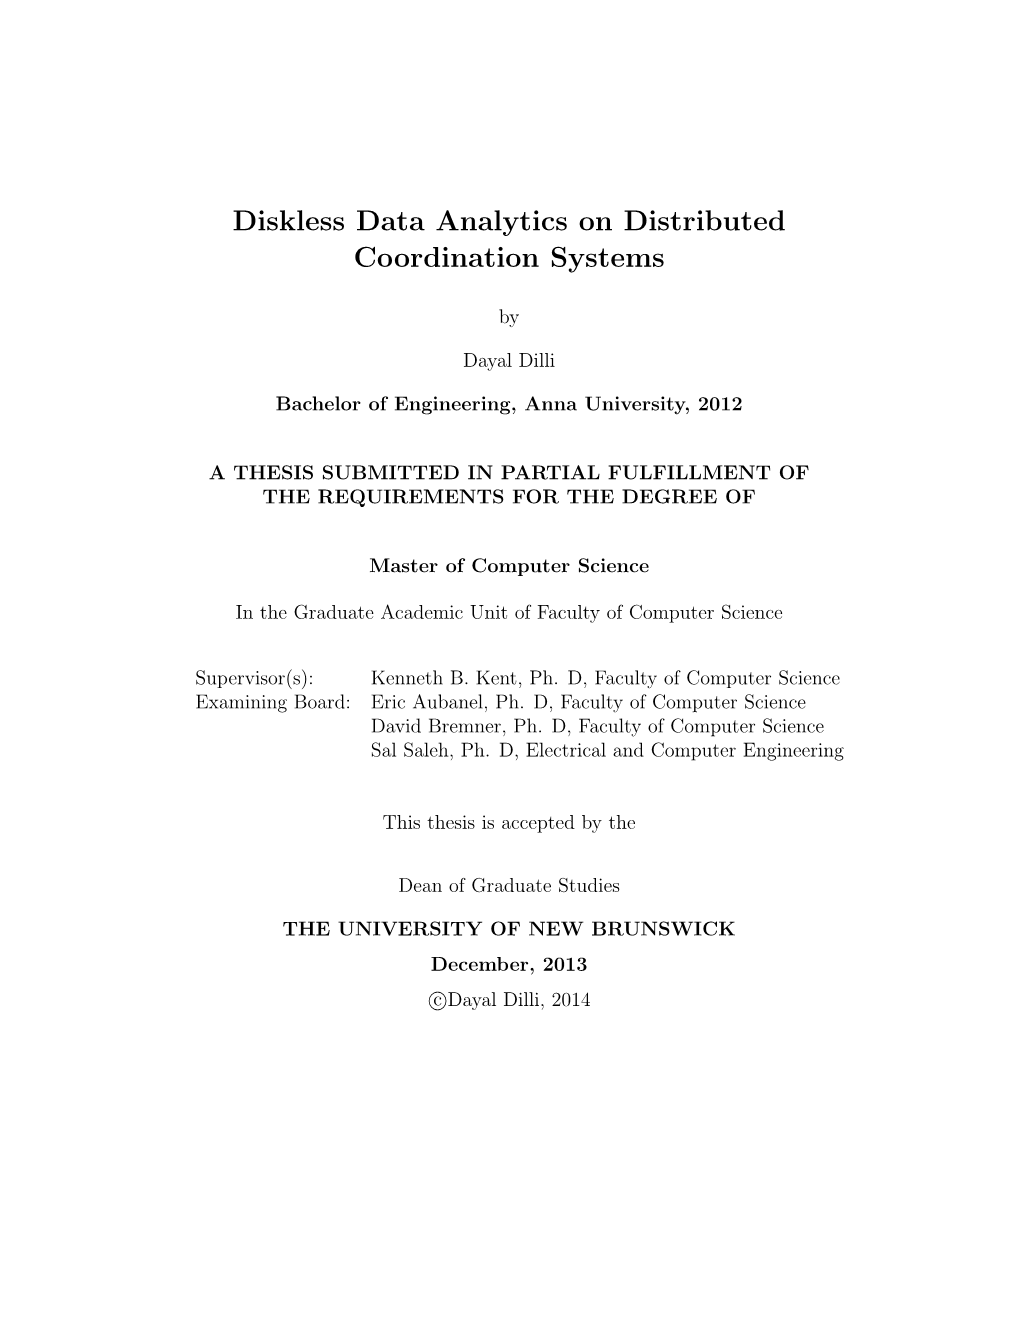 Diskless Data Analytics on Distributed Coordination Systems